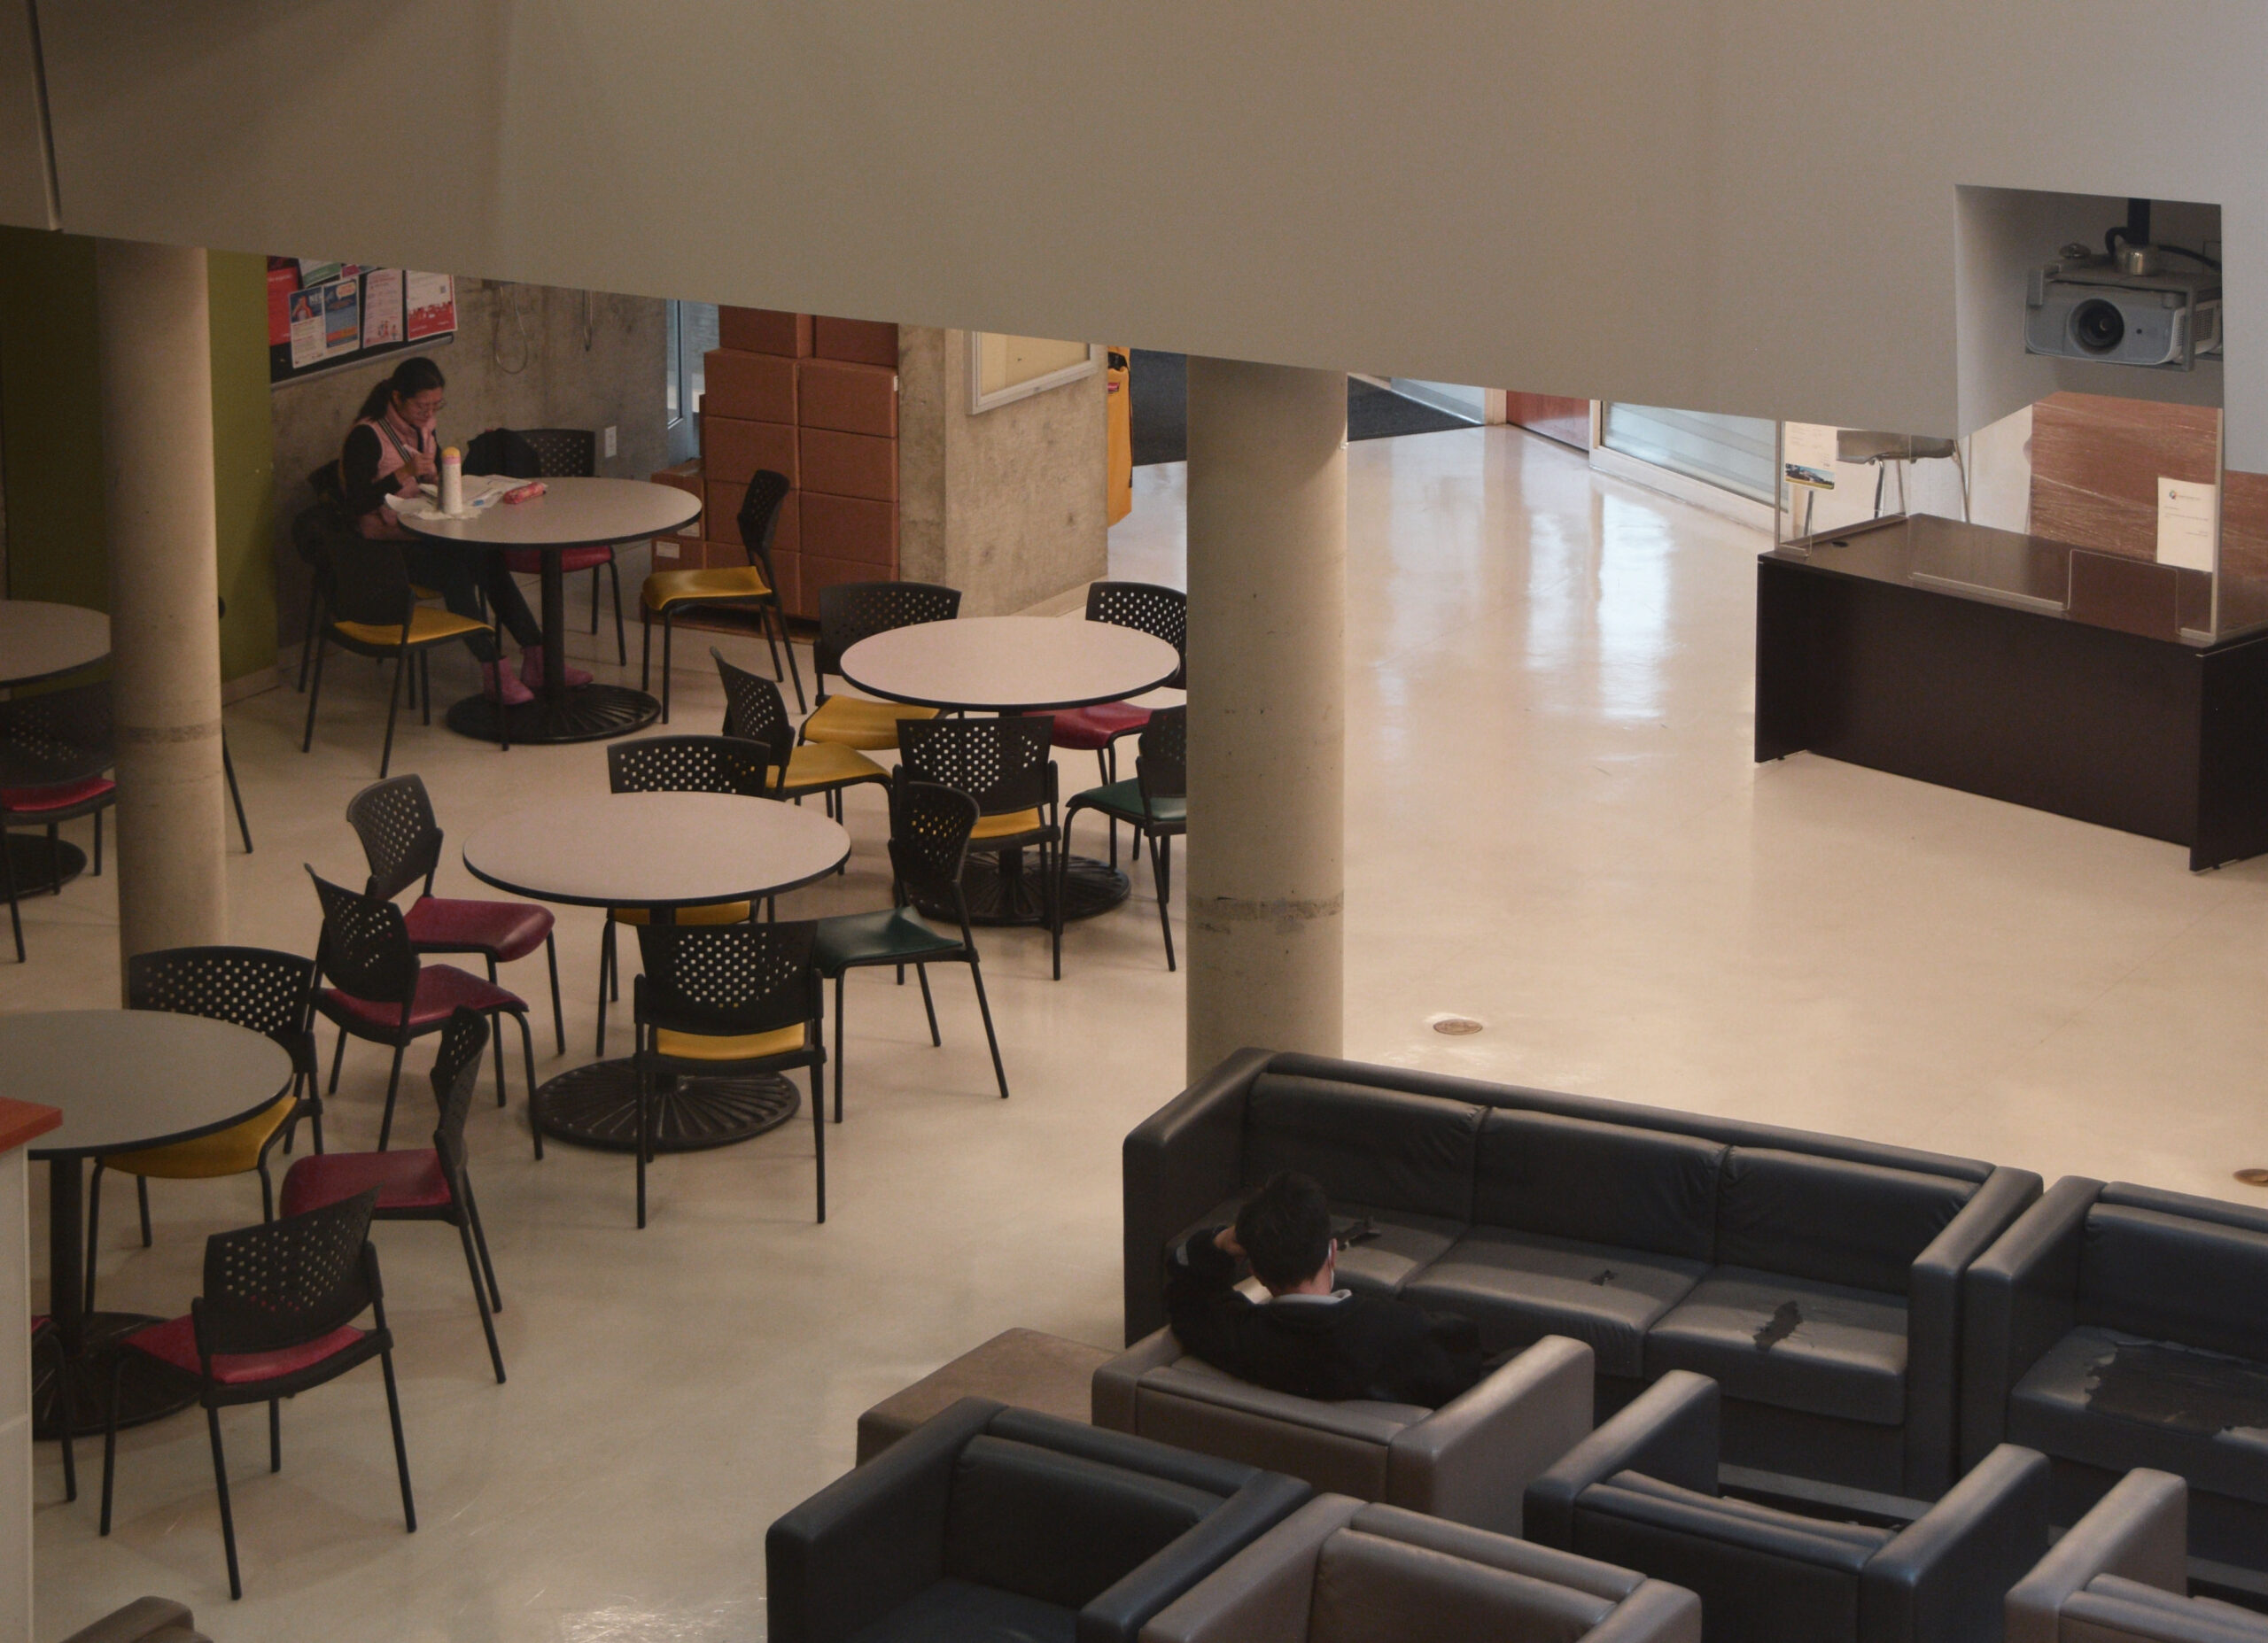 Seating and tables in the LSU building seen from above.